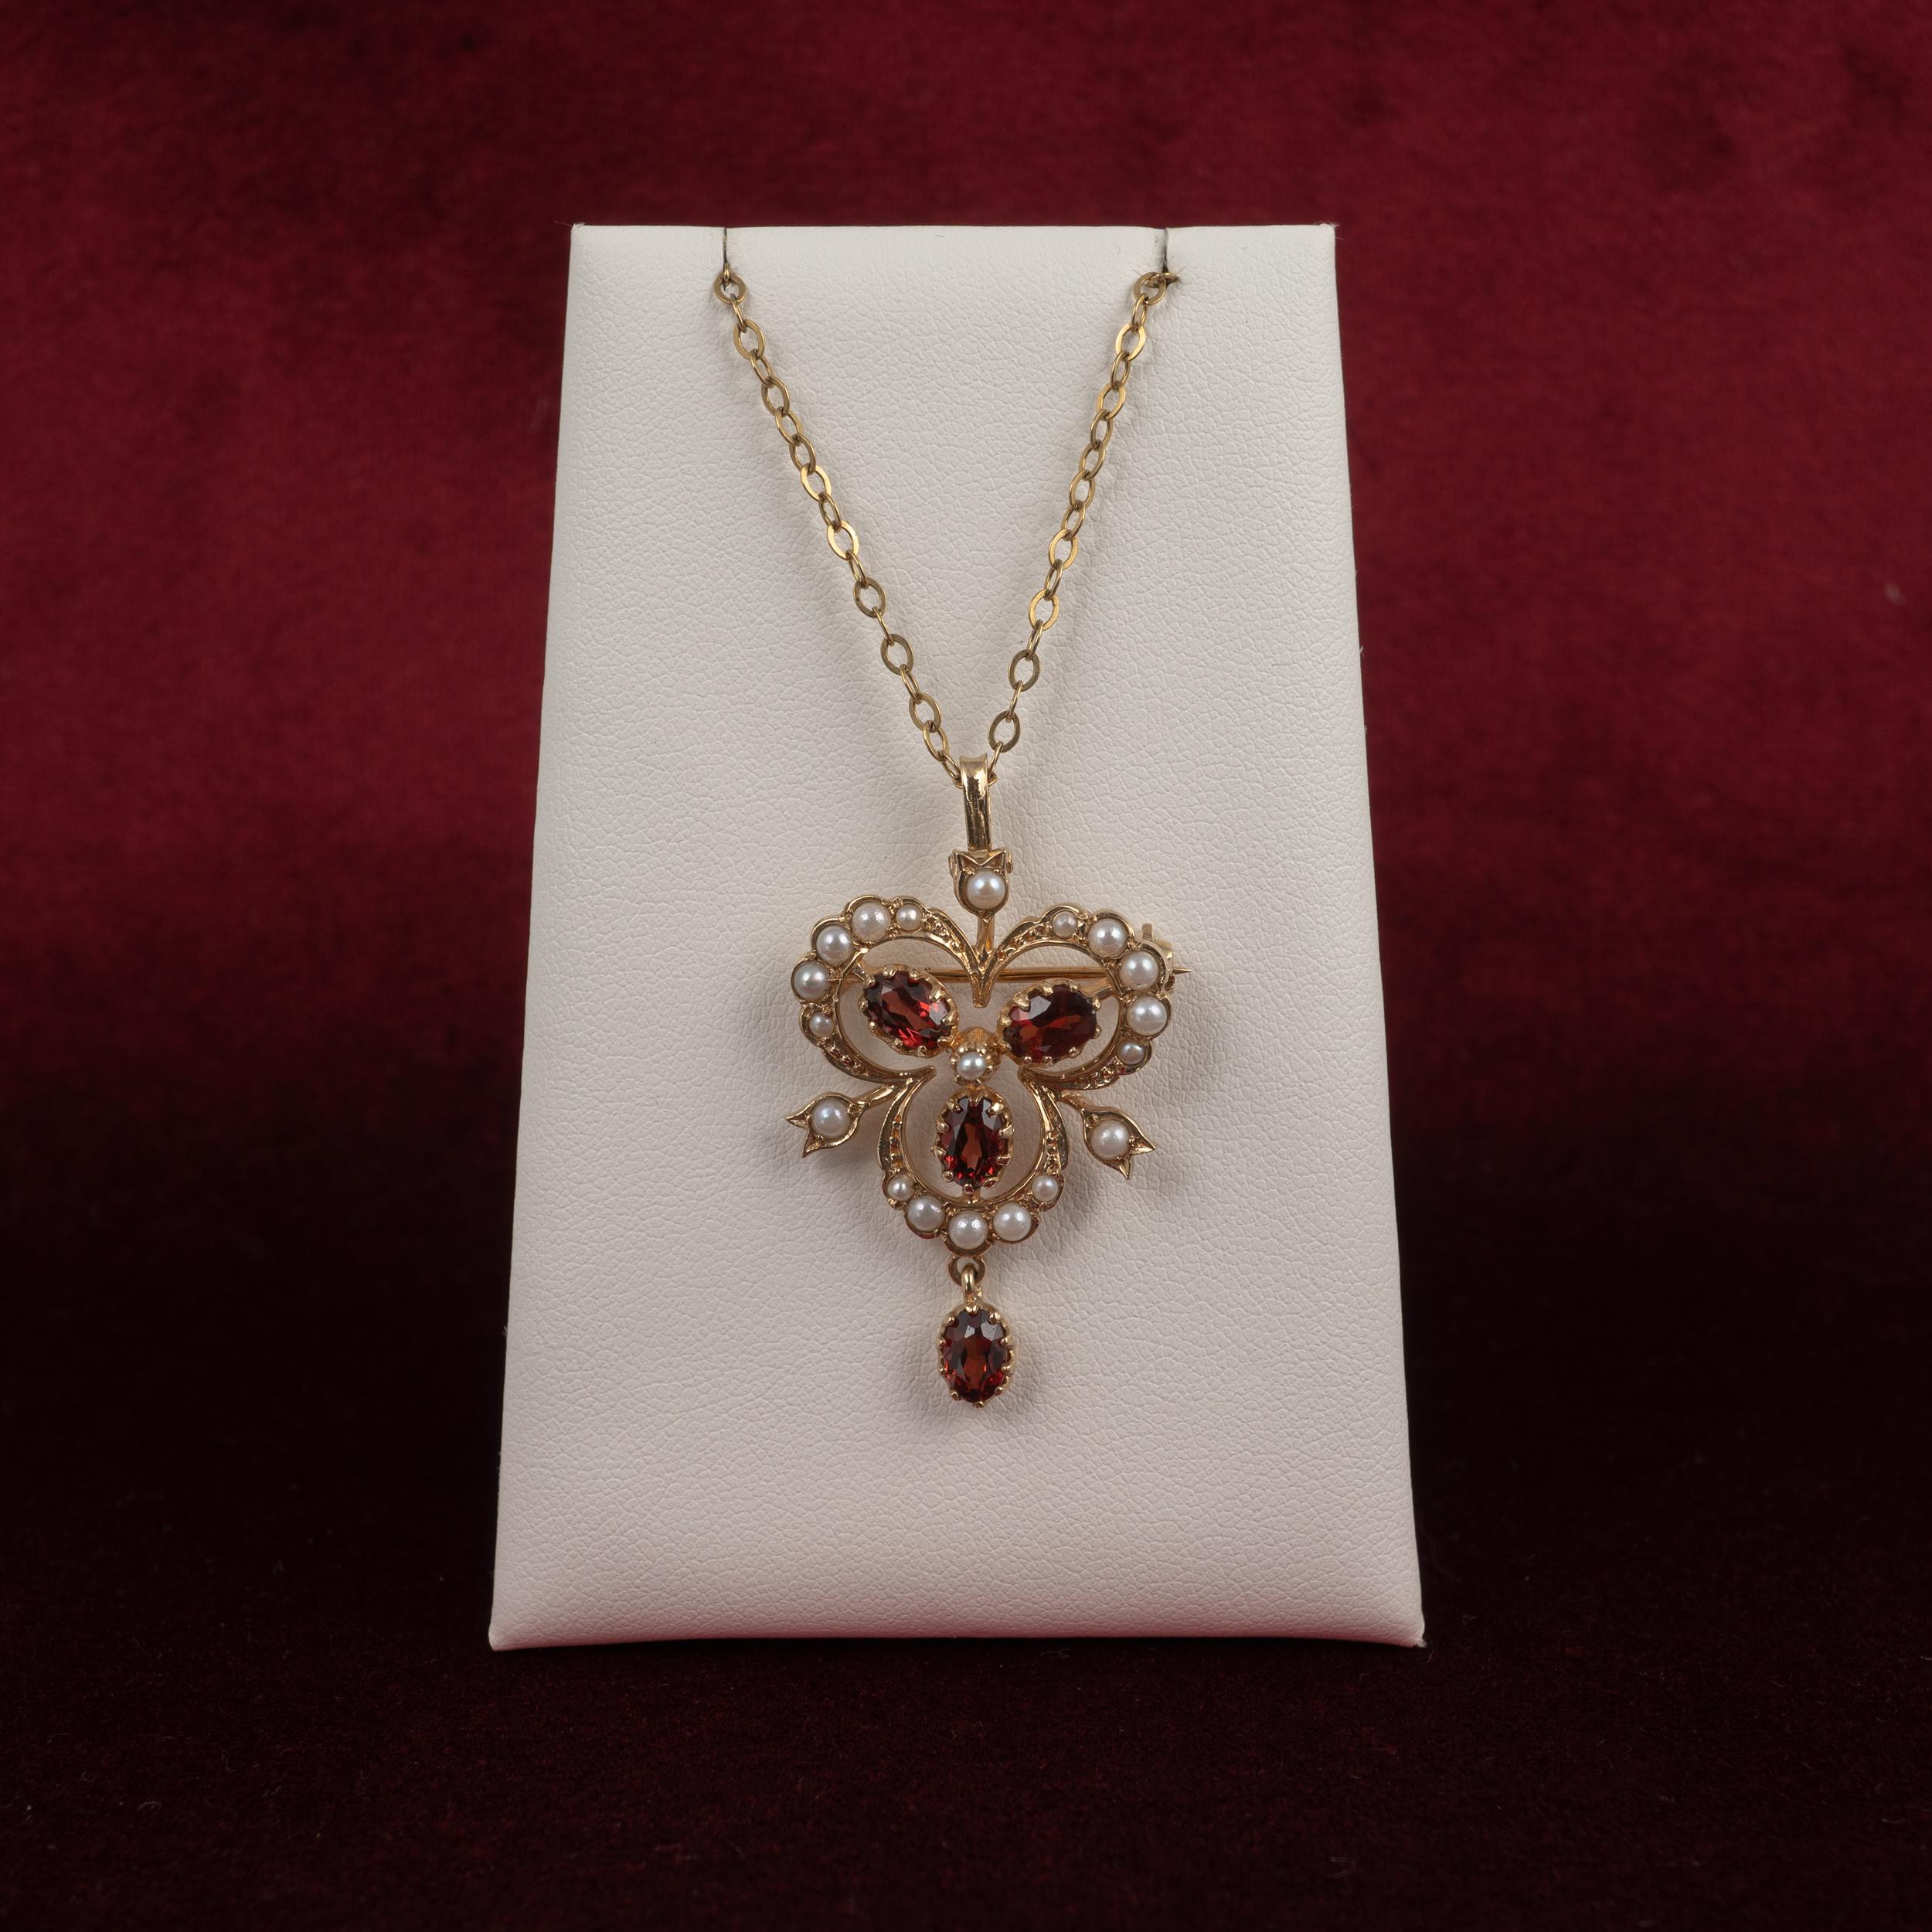 A beautifully presented garnet and pearl. Trefoil shape. pendant brooch which can be worn as a pendant or a brooch, features 3 oval garnets and 16 complimenting seed pearls graduated around the scrolled frame, set to the center and also inside 3